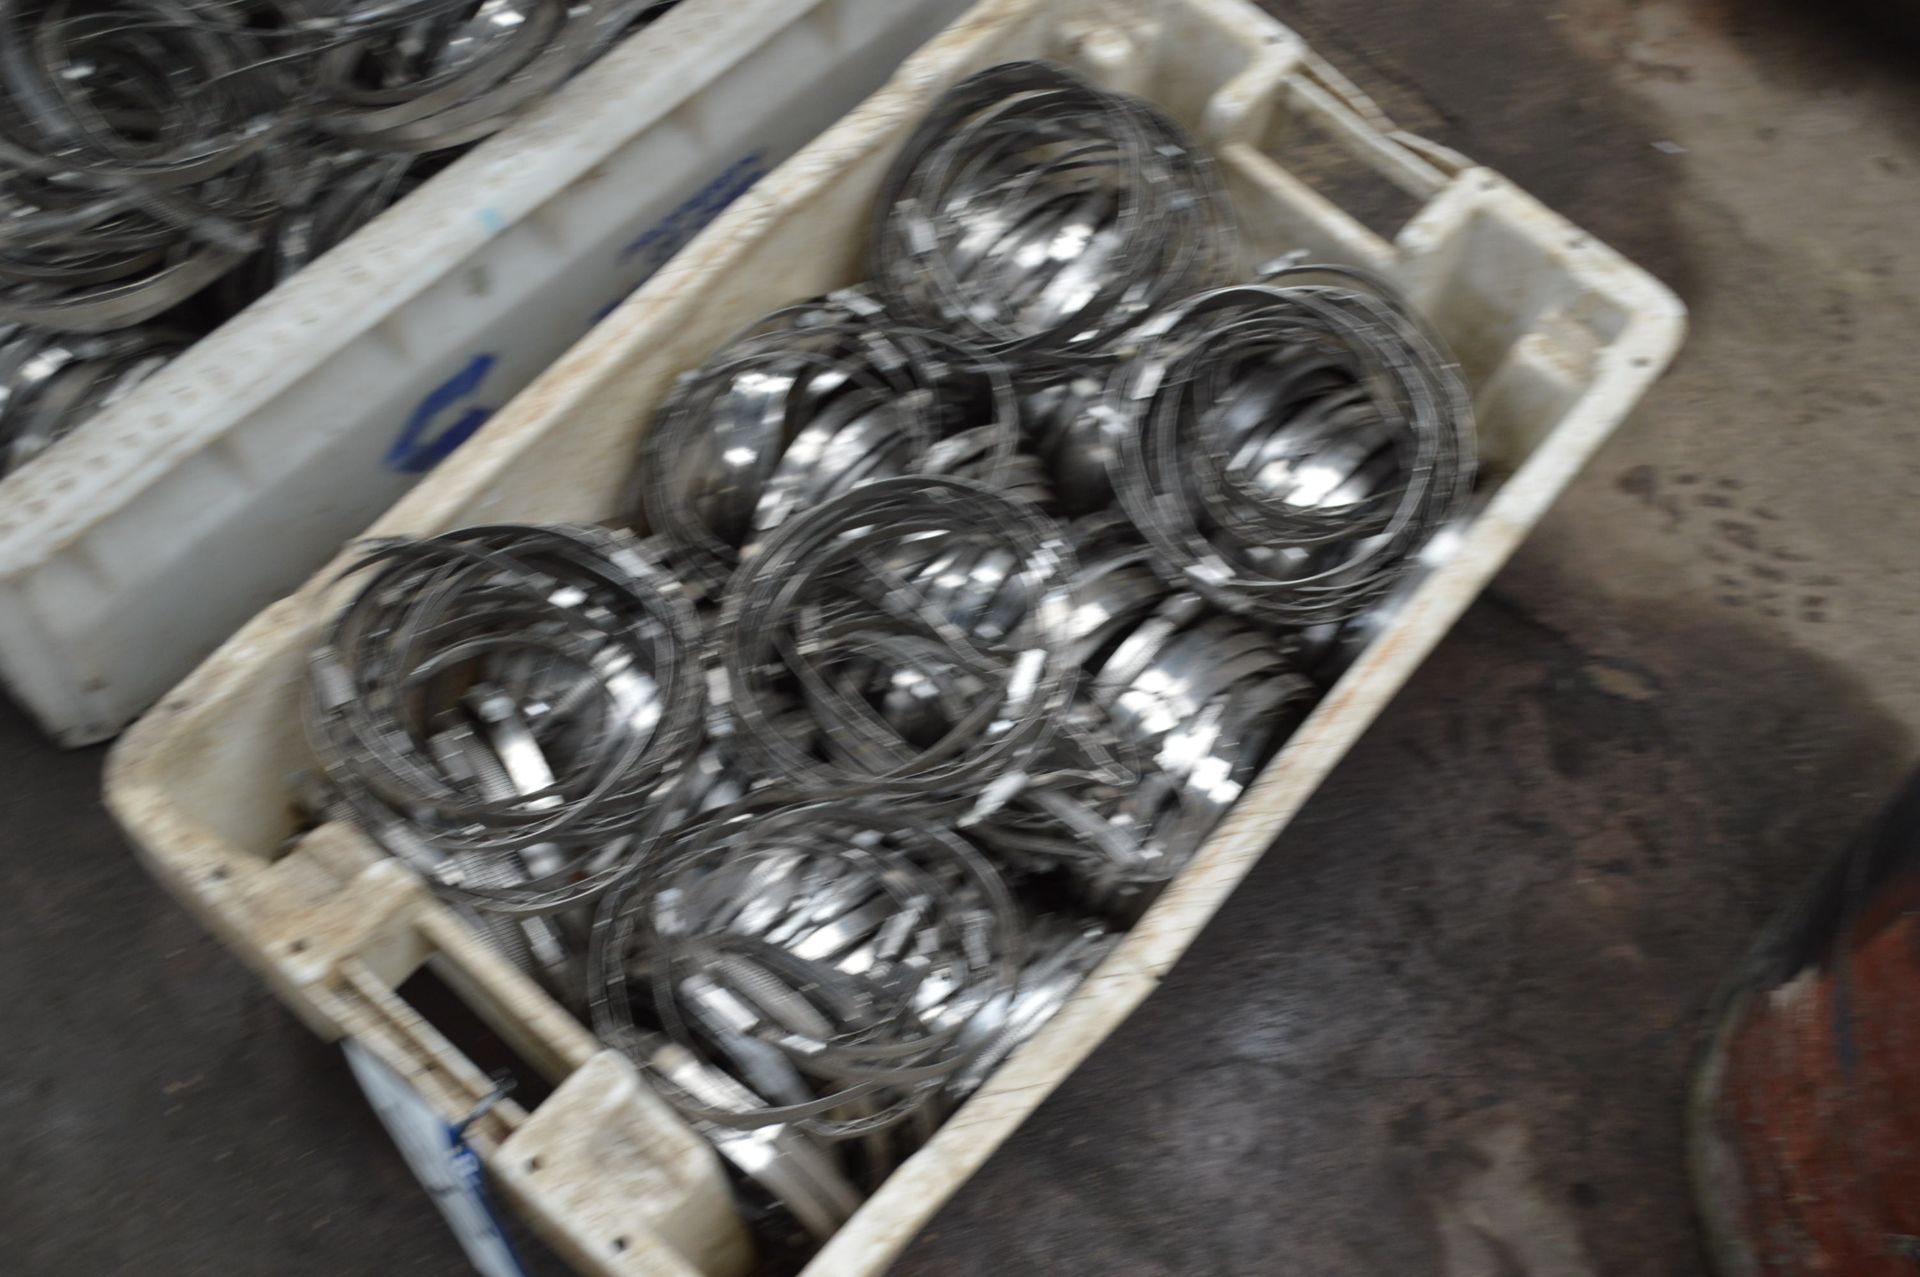 Compression Rings, in one box